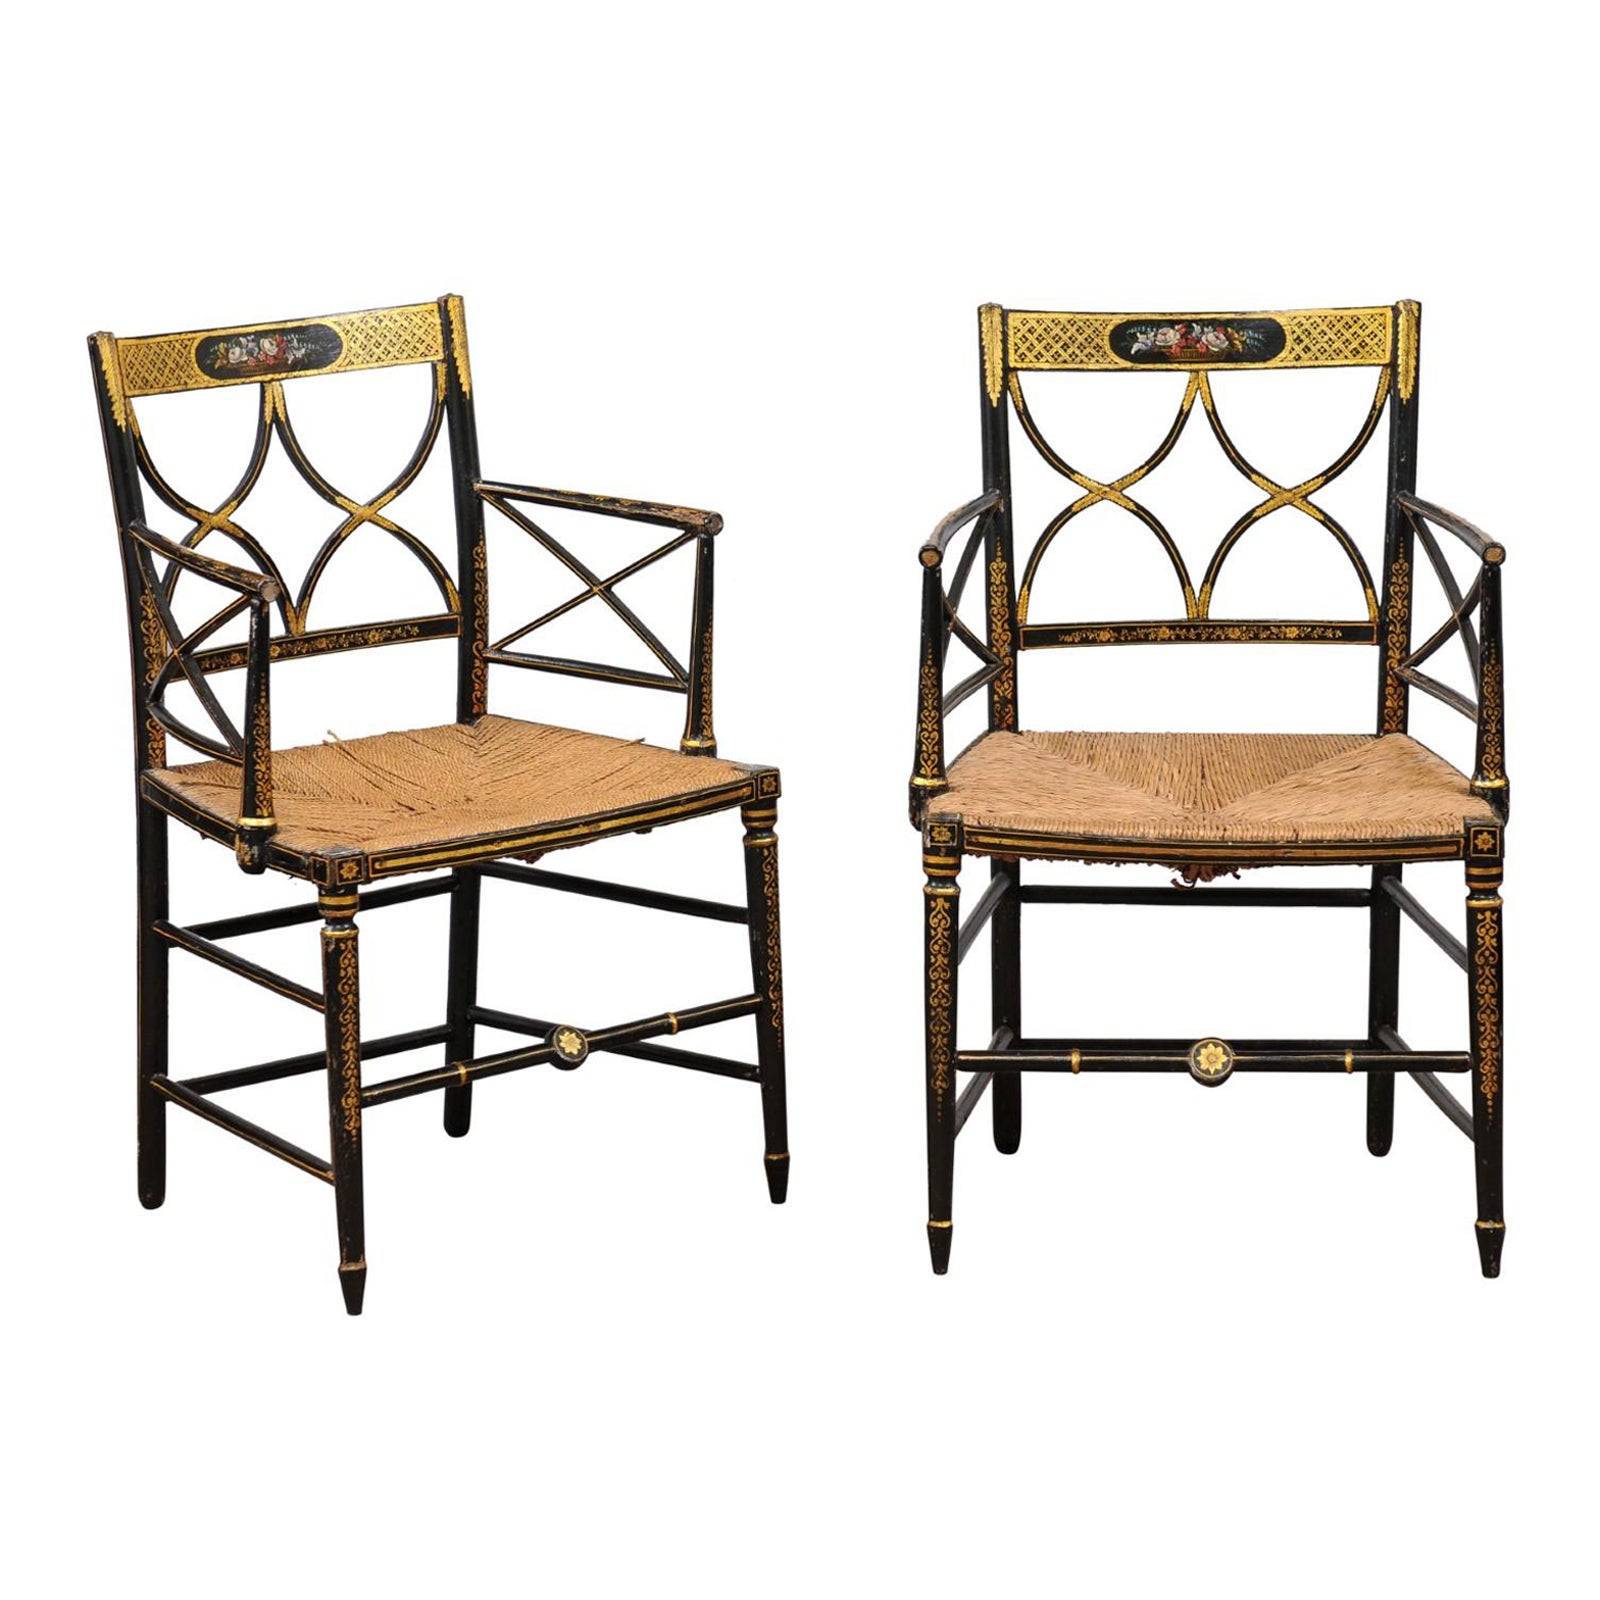  Pair of Regency Black Painted Arm Chairs with Floral Decoration & Rush Seats